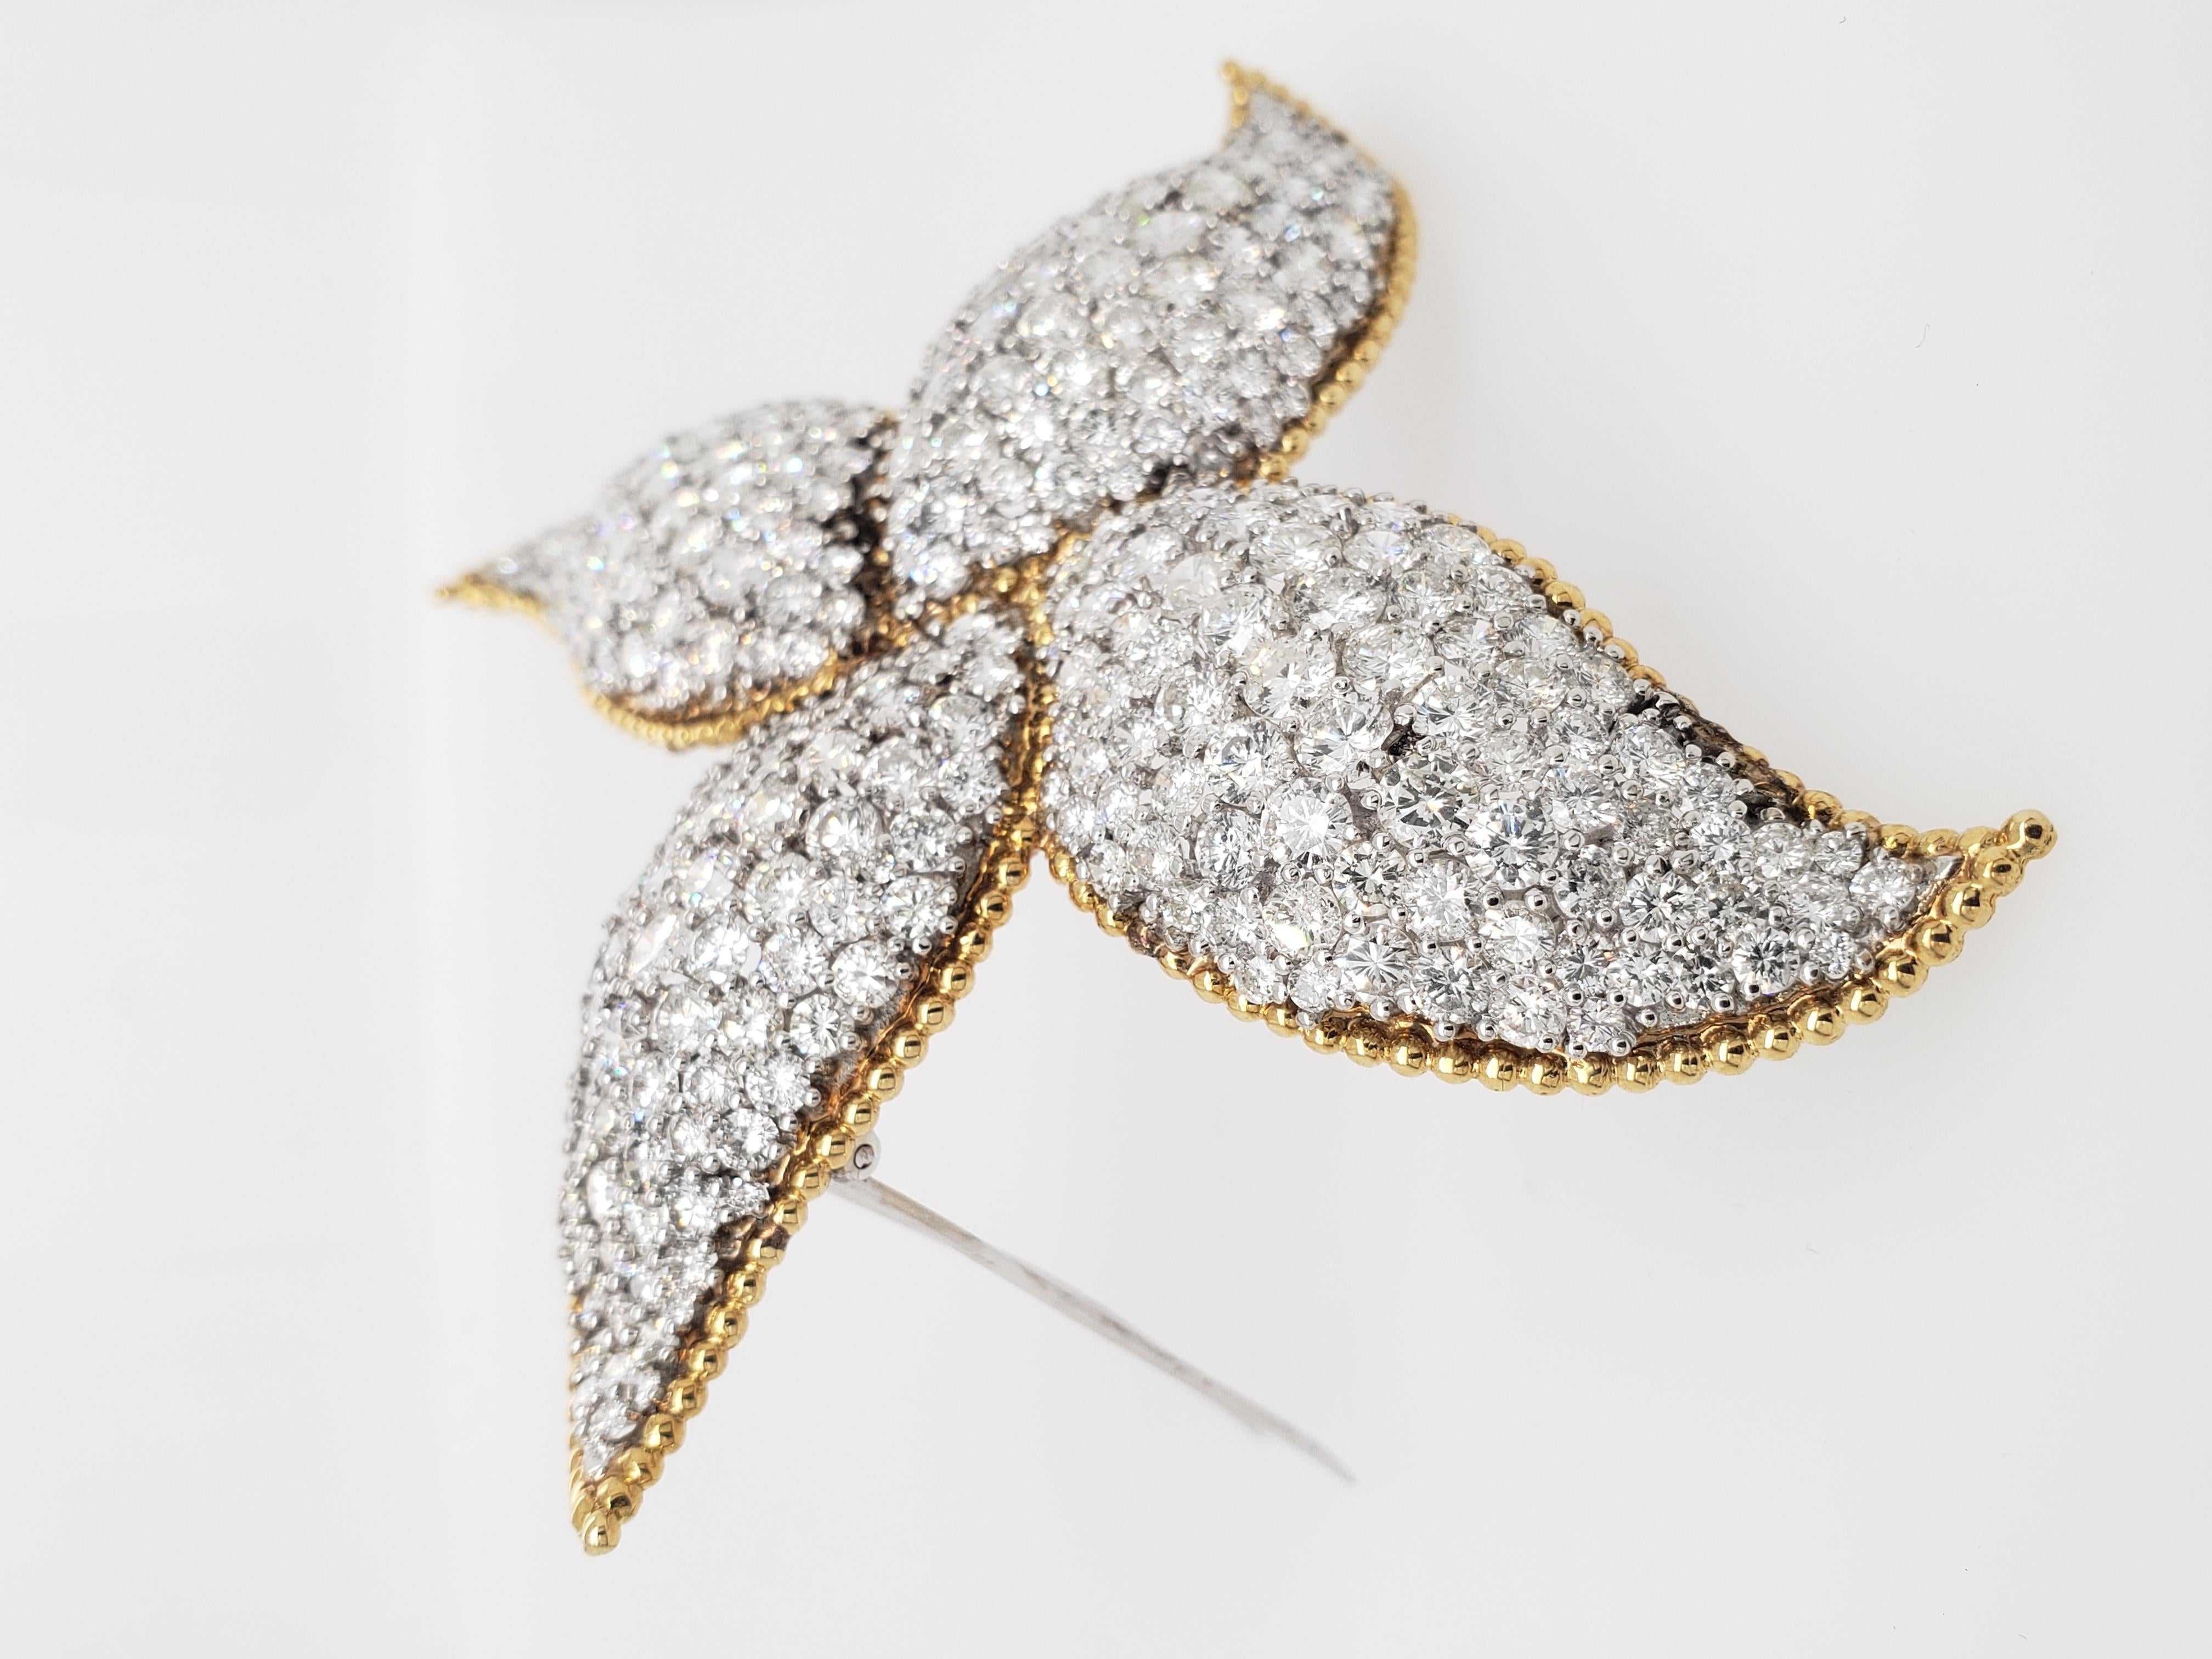 This one of a kind Brooch designed as a pinwheel is set with numerous round diamonds weighing approximately 34 Carats. Set within a Yellow Gold Frame.
The stone Setting is impeccable, giving off enormous luster! 

This 3 inch brooch will really make